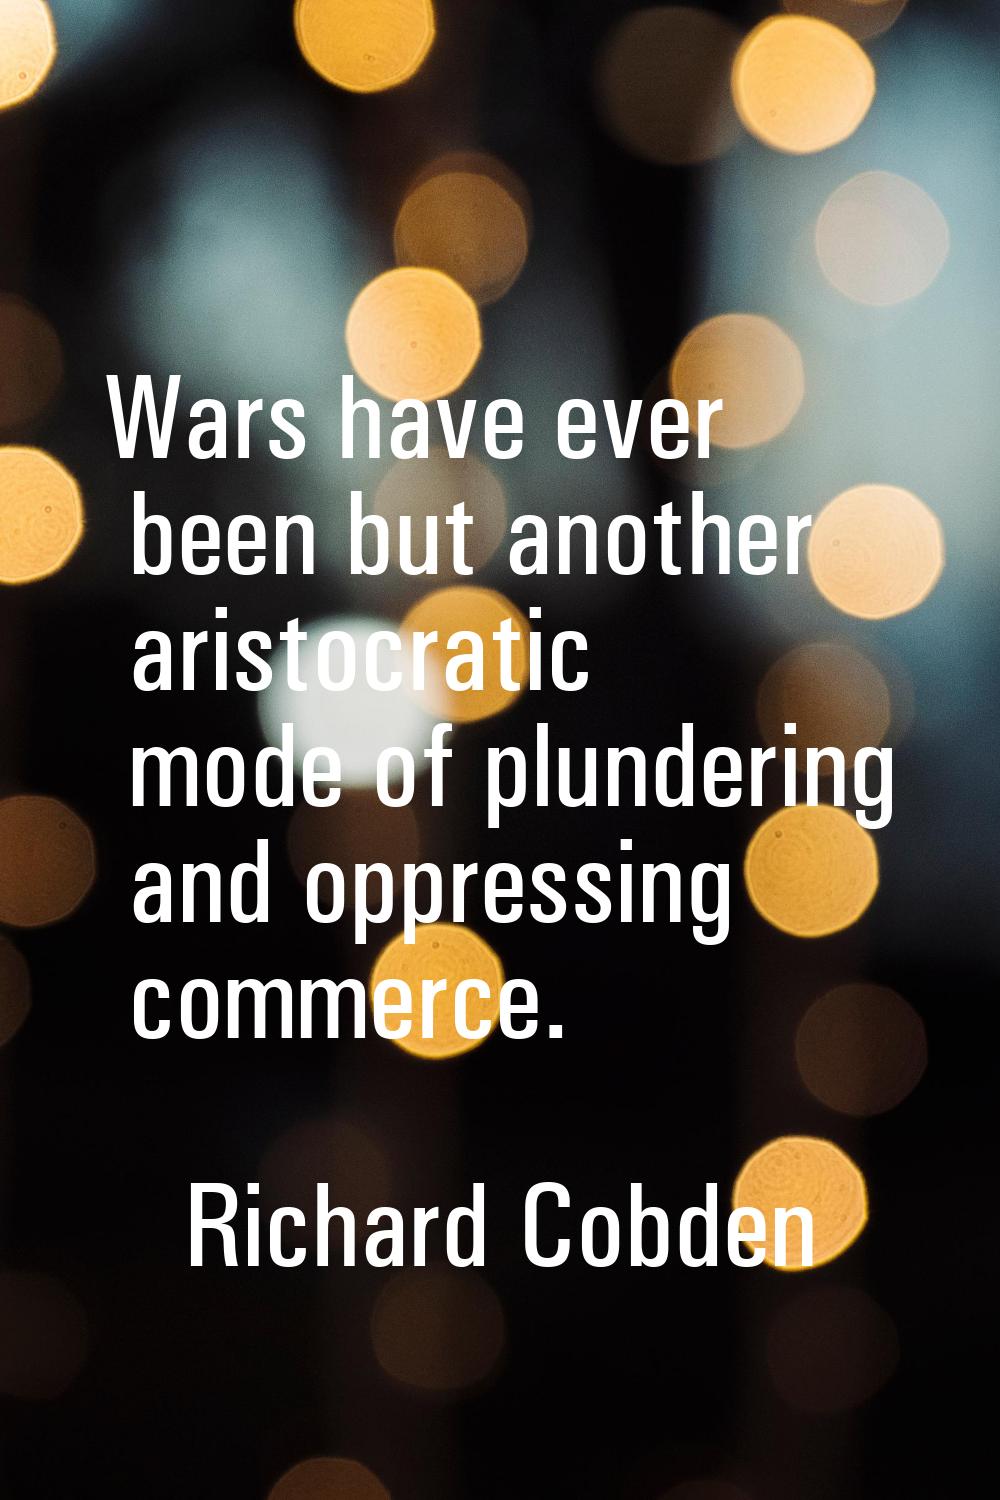 Wars have ever been but another aristocratic mode of plundering and oppressing commerce.